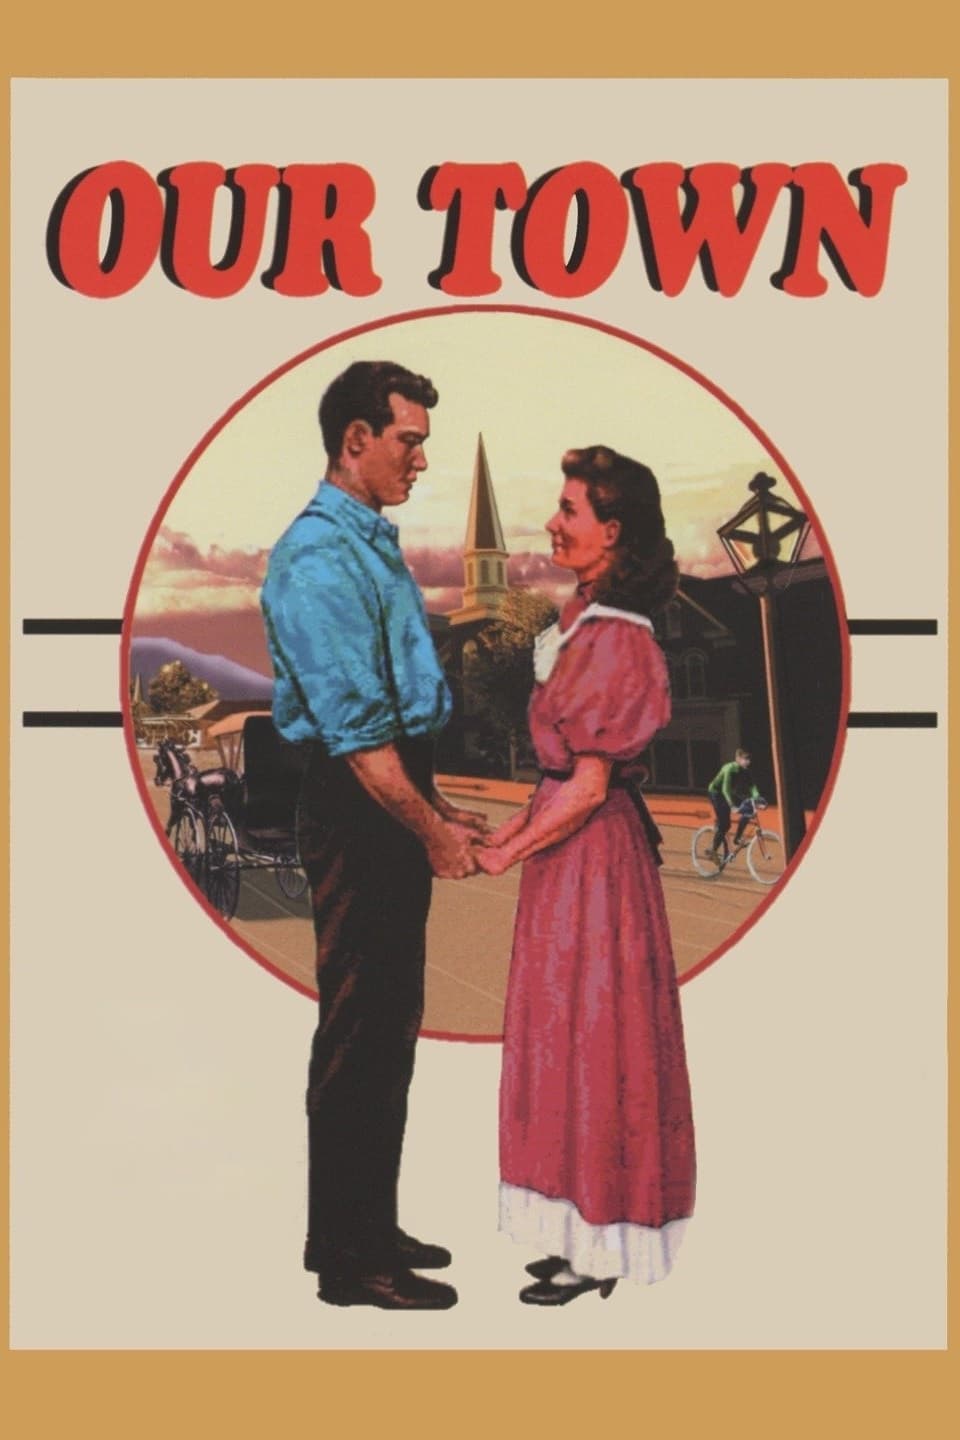 Poster for the movie "Our Town"